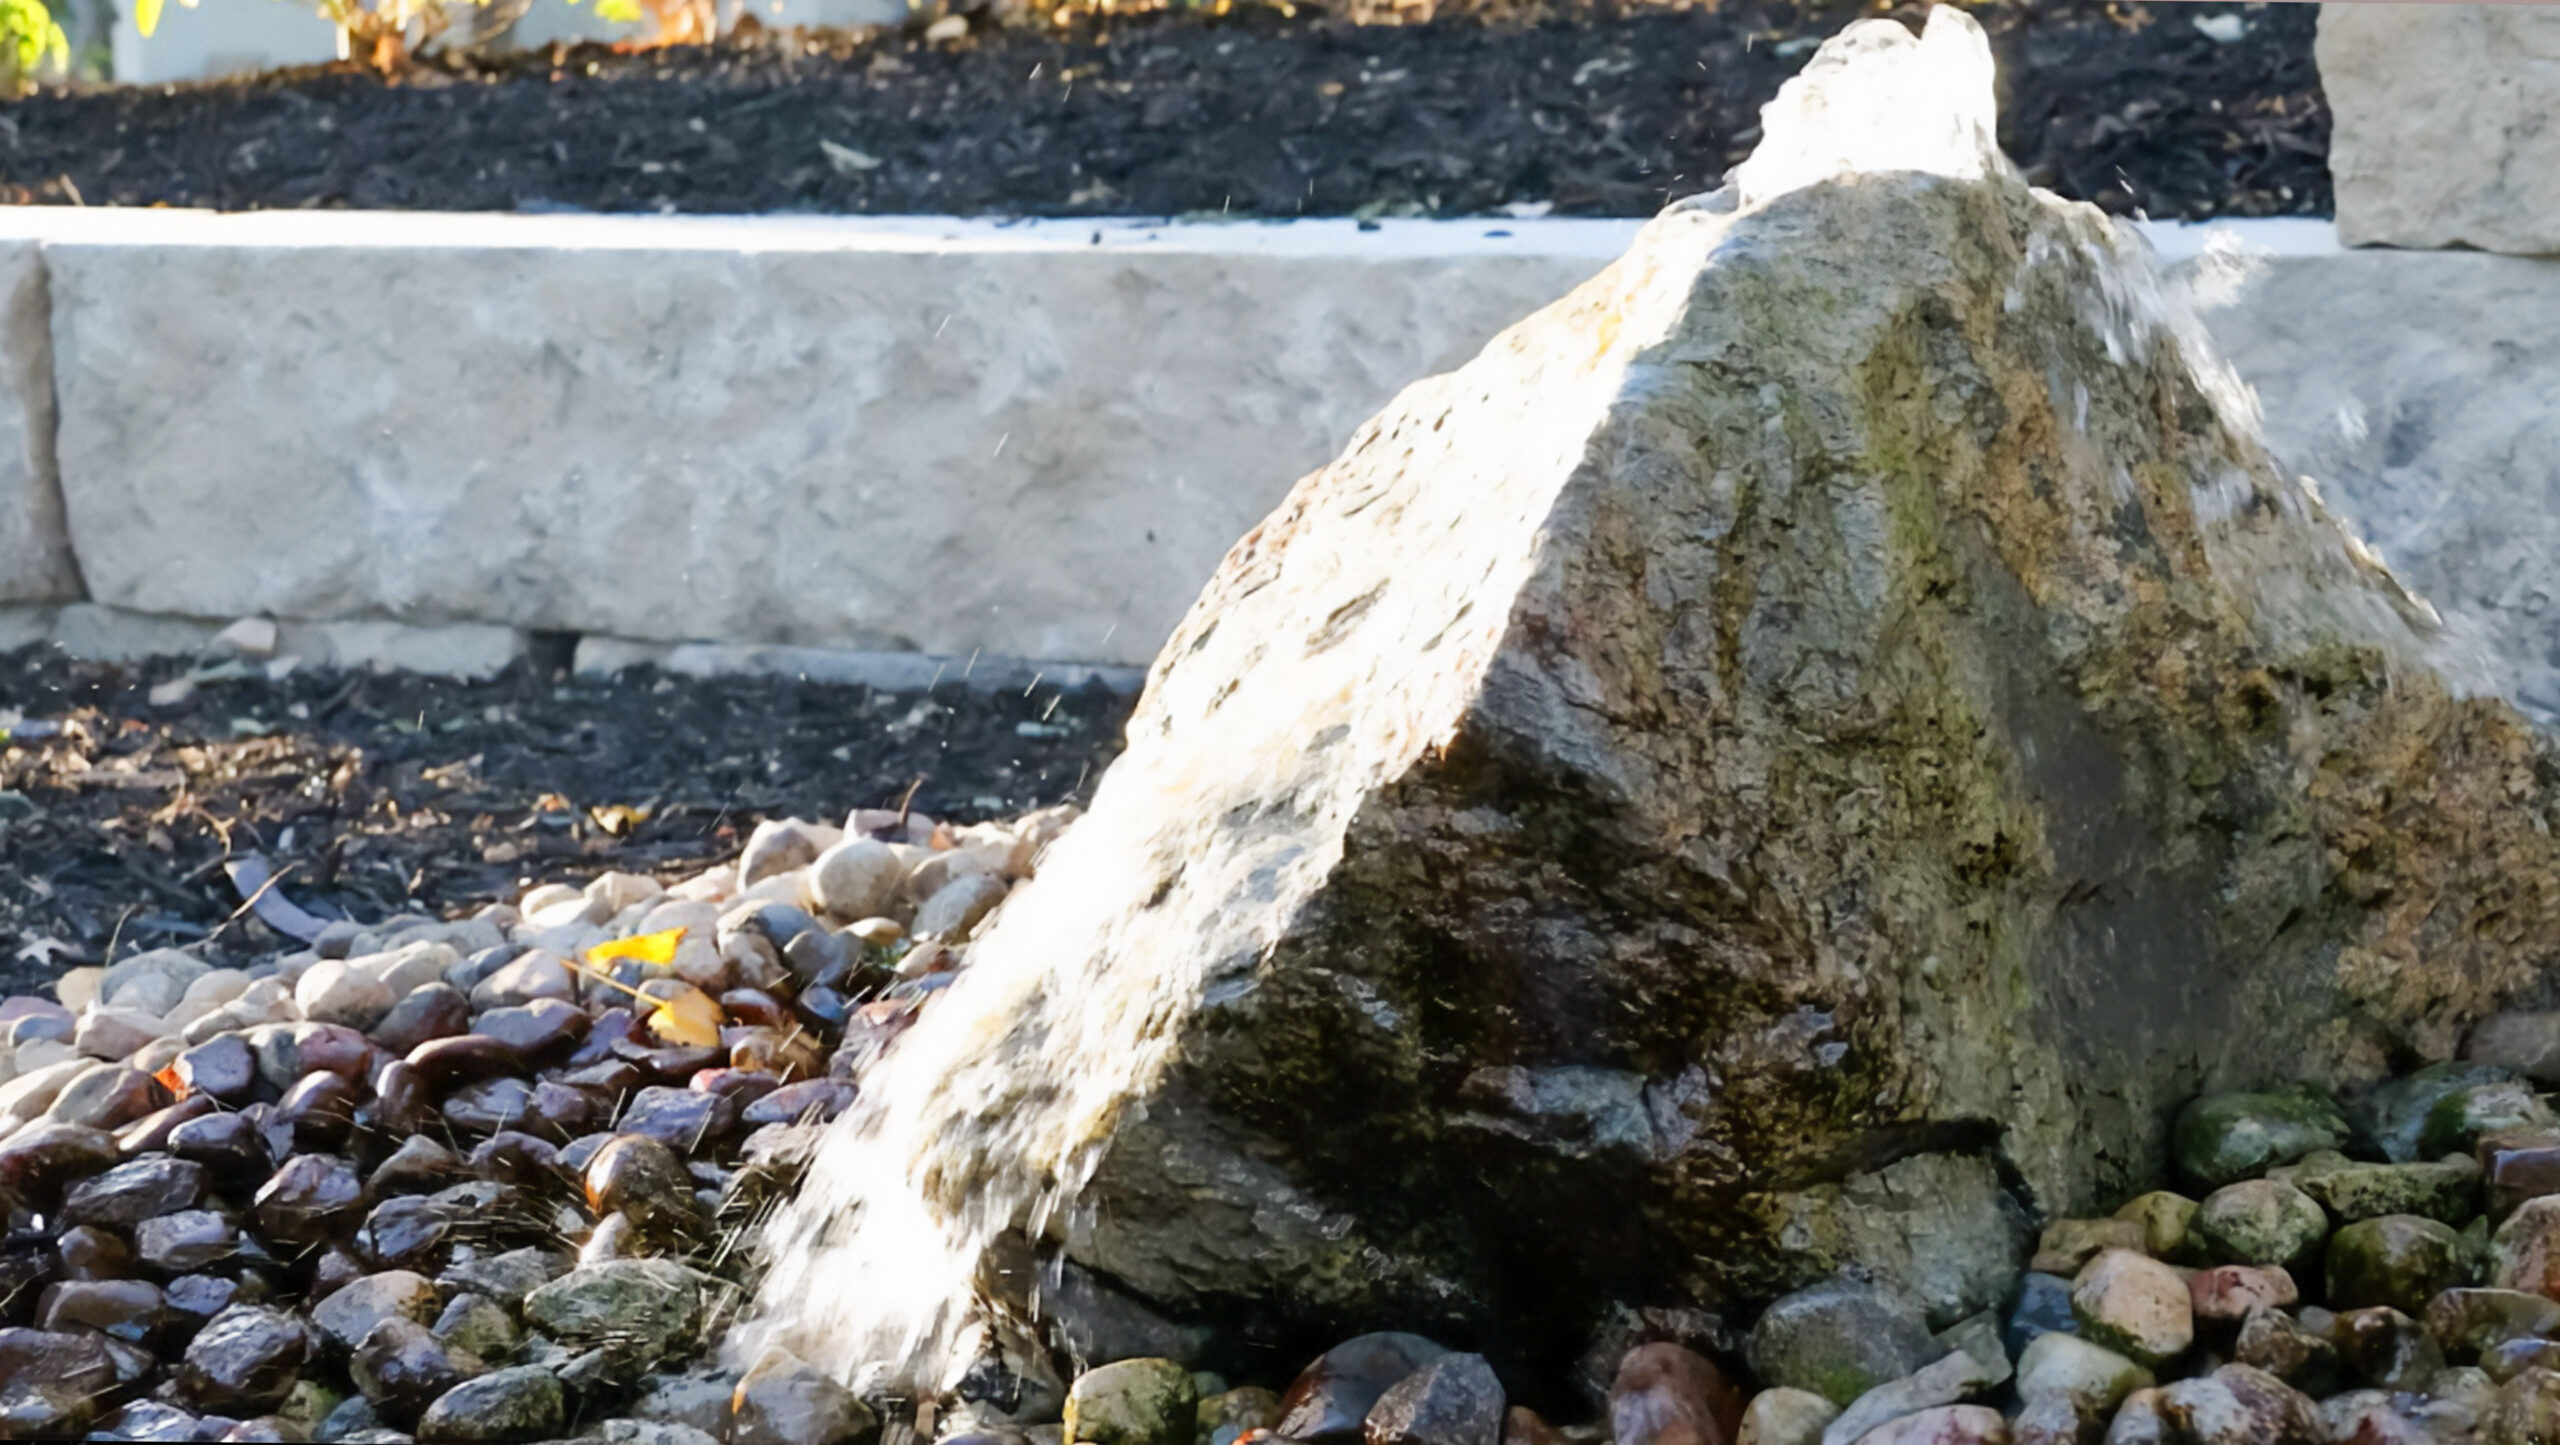 Close-up view of a water feature with a rock fountain and pebbles